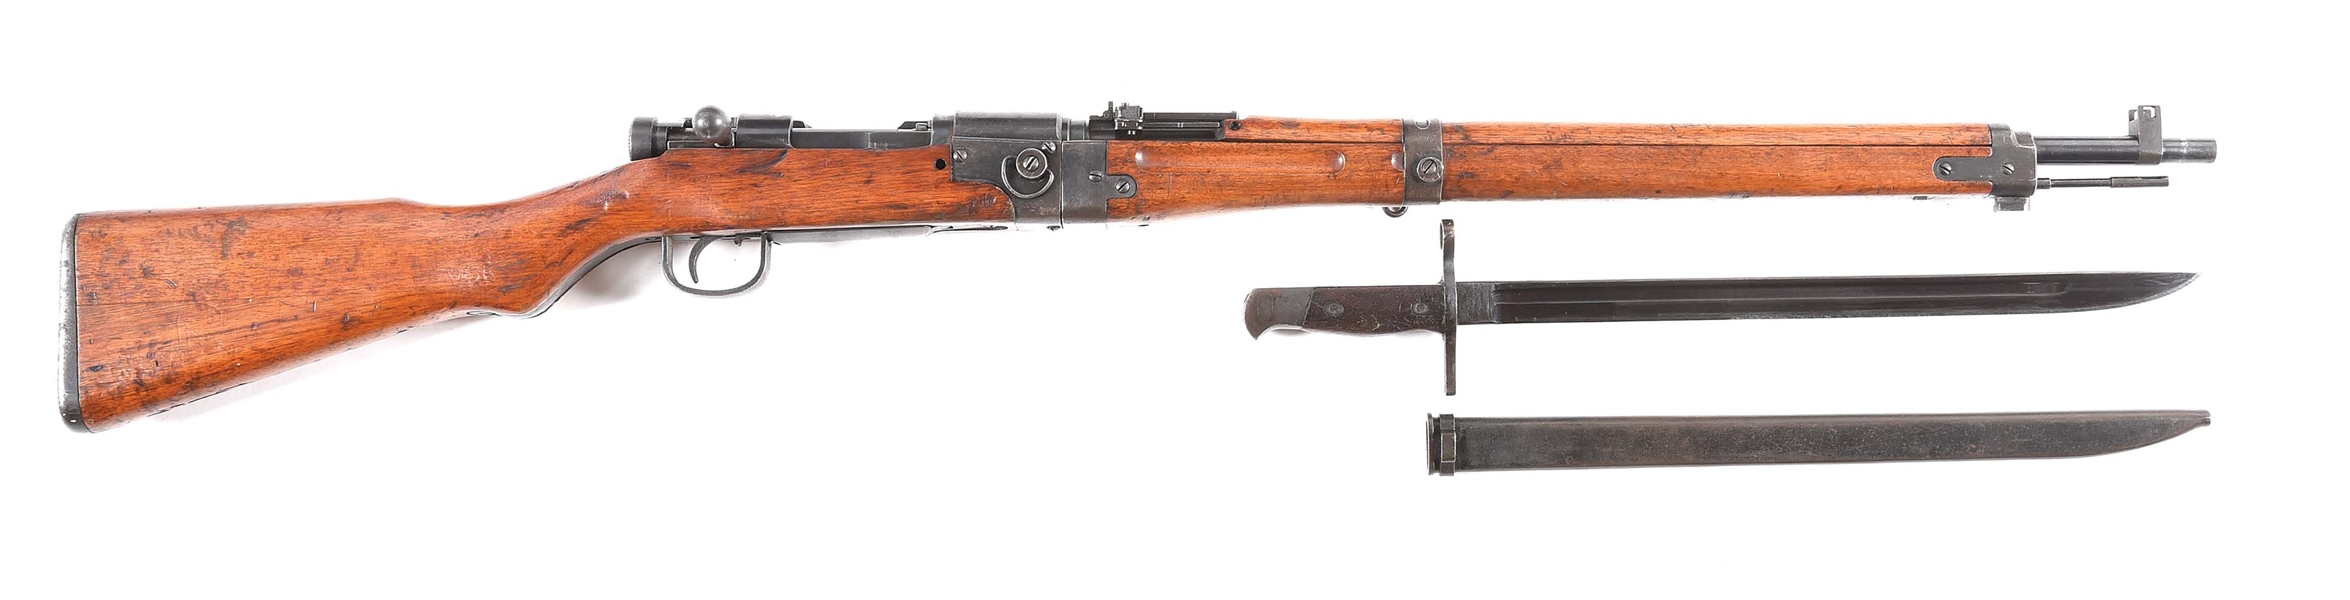 (C) MATCHING IMPERIAL JAPANESE TYPE 2 PARATROOPER BOLT ACTION RIFLE.